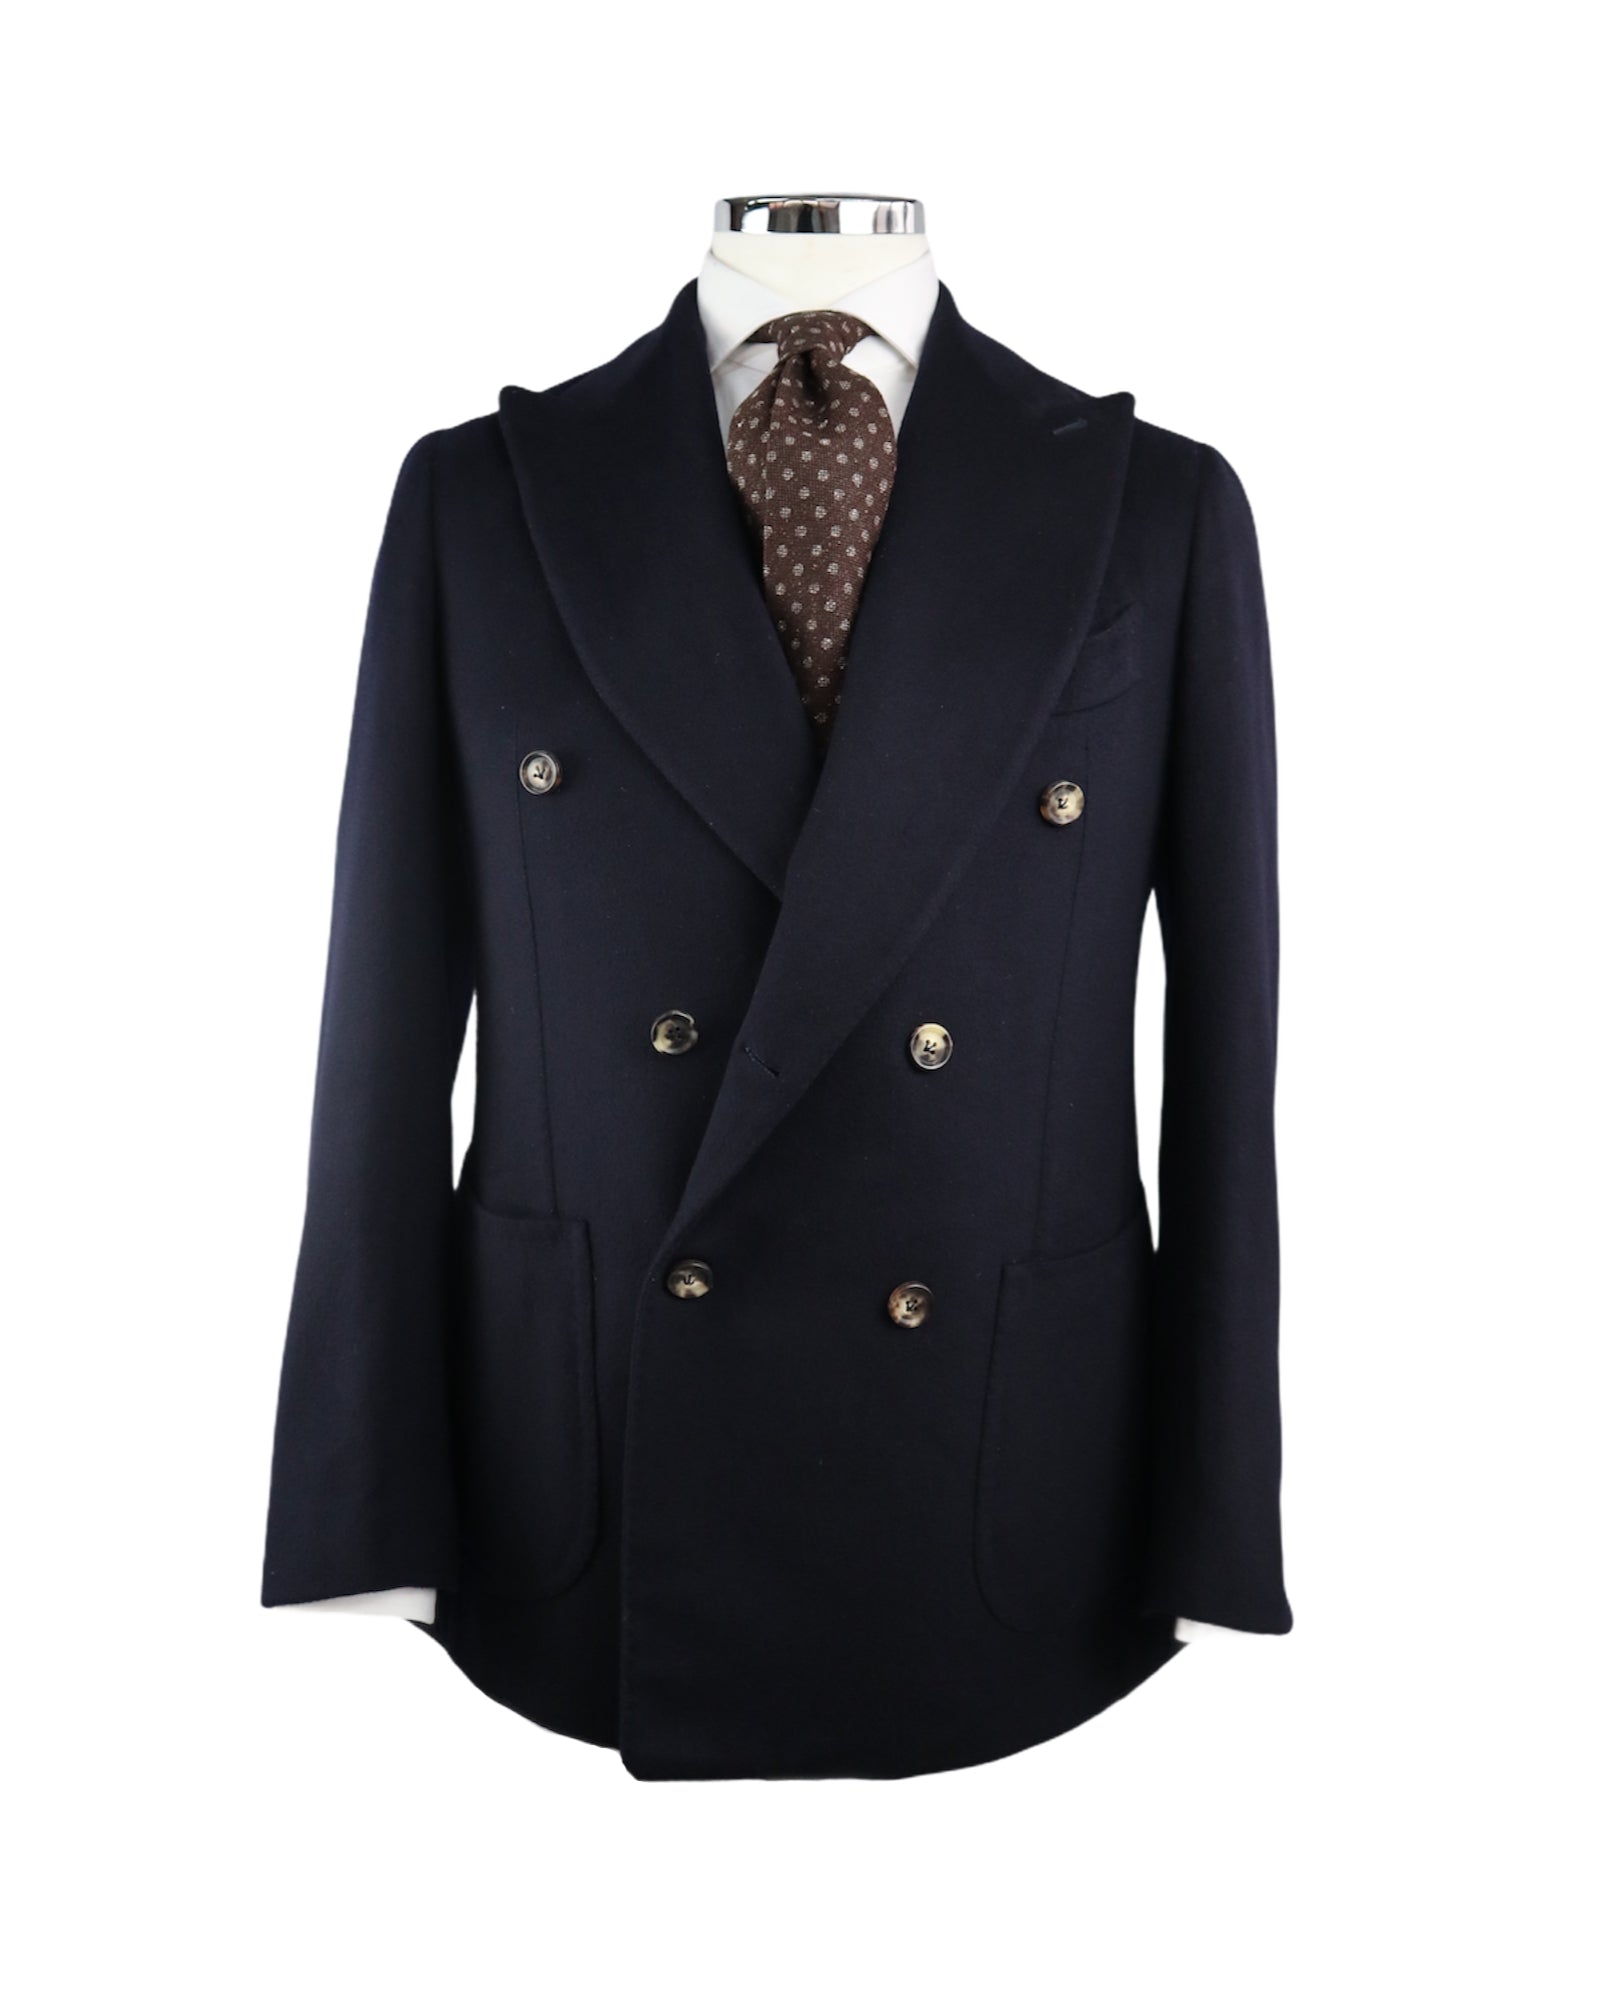 Nick Double breasted Navy Blue Wool Jacket